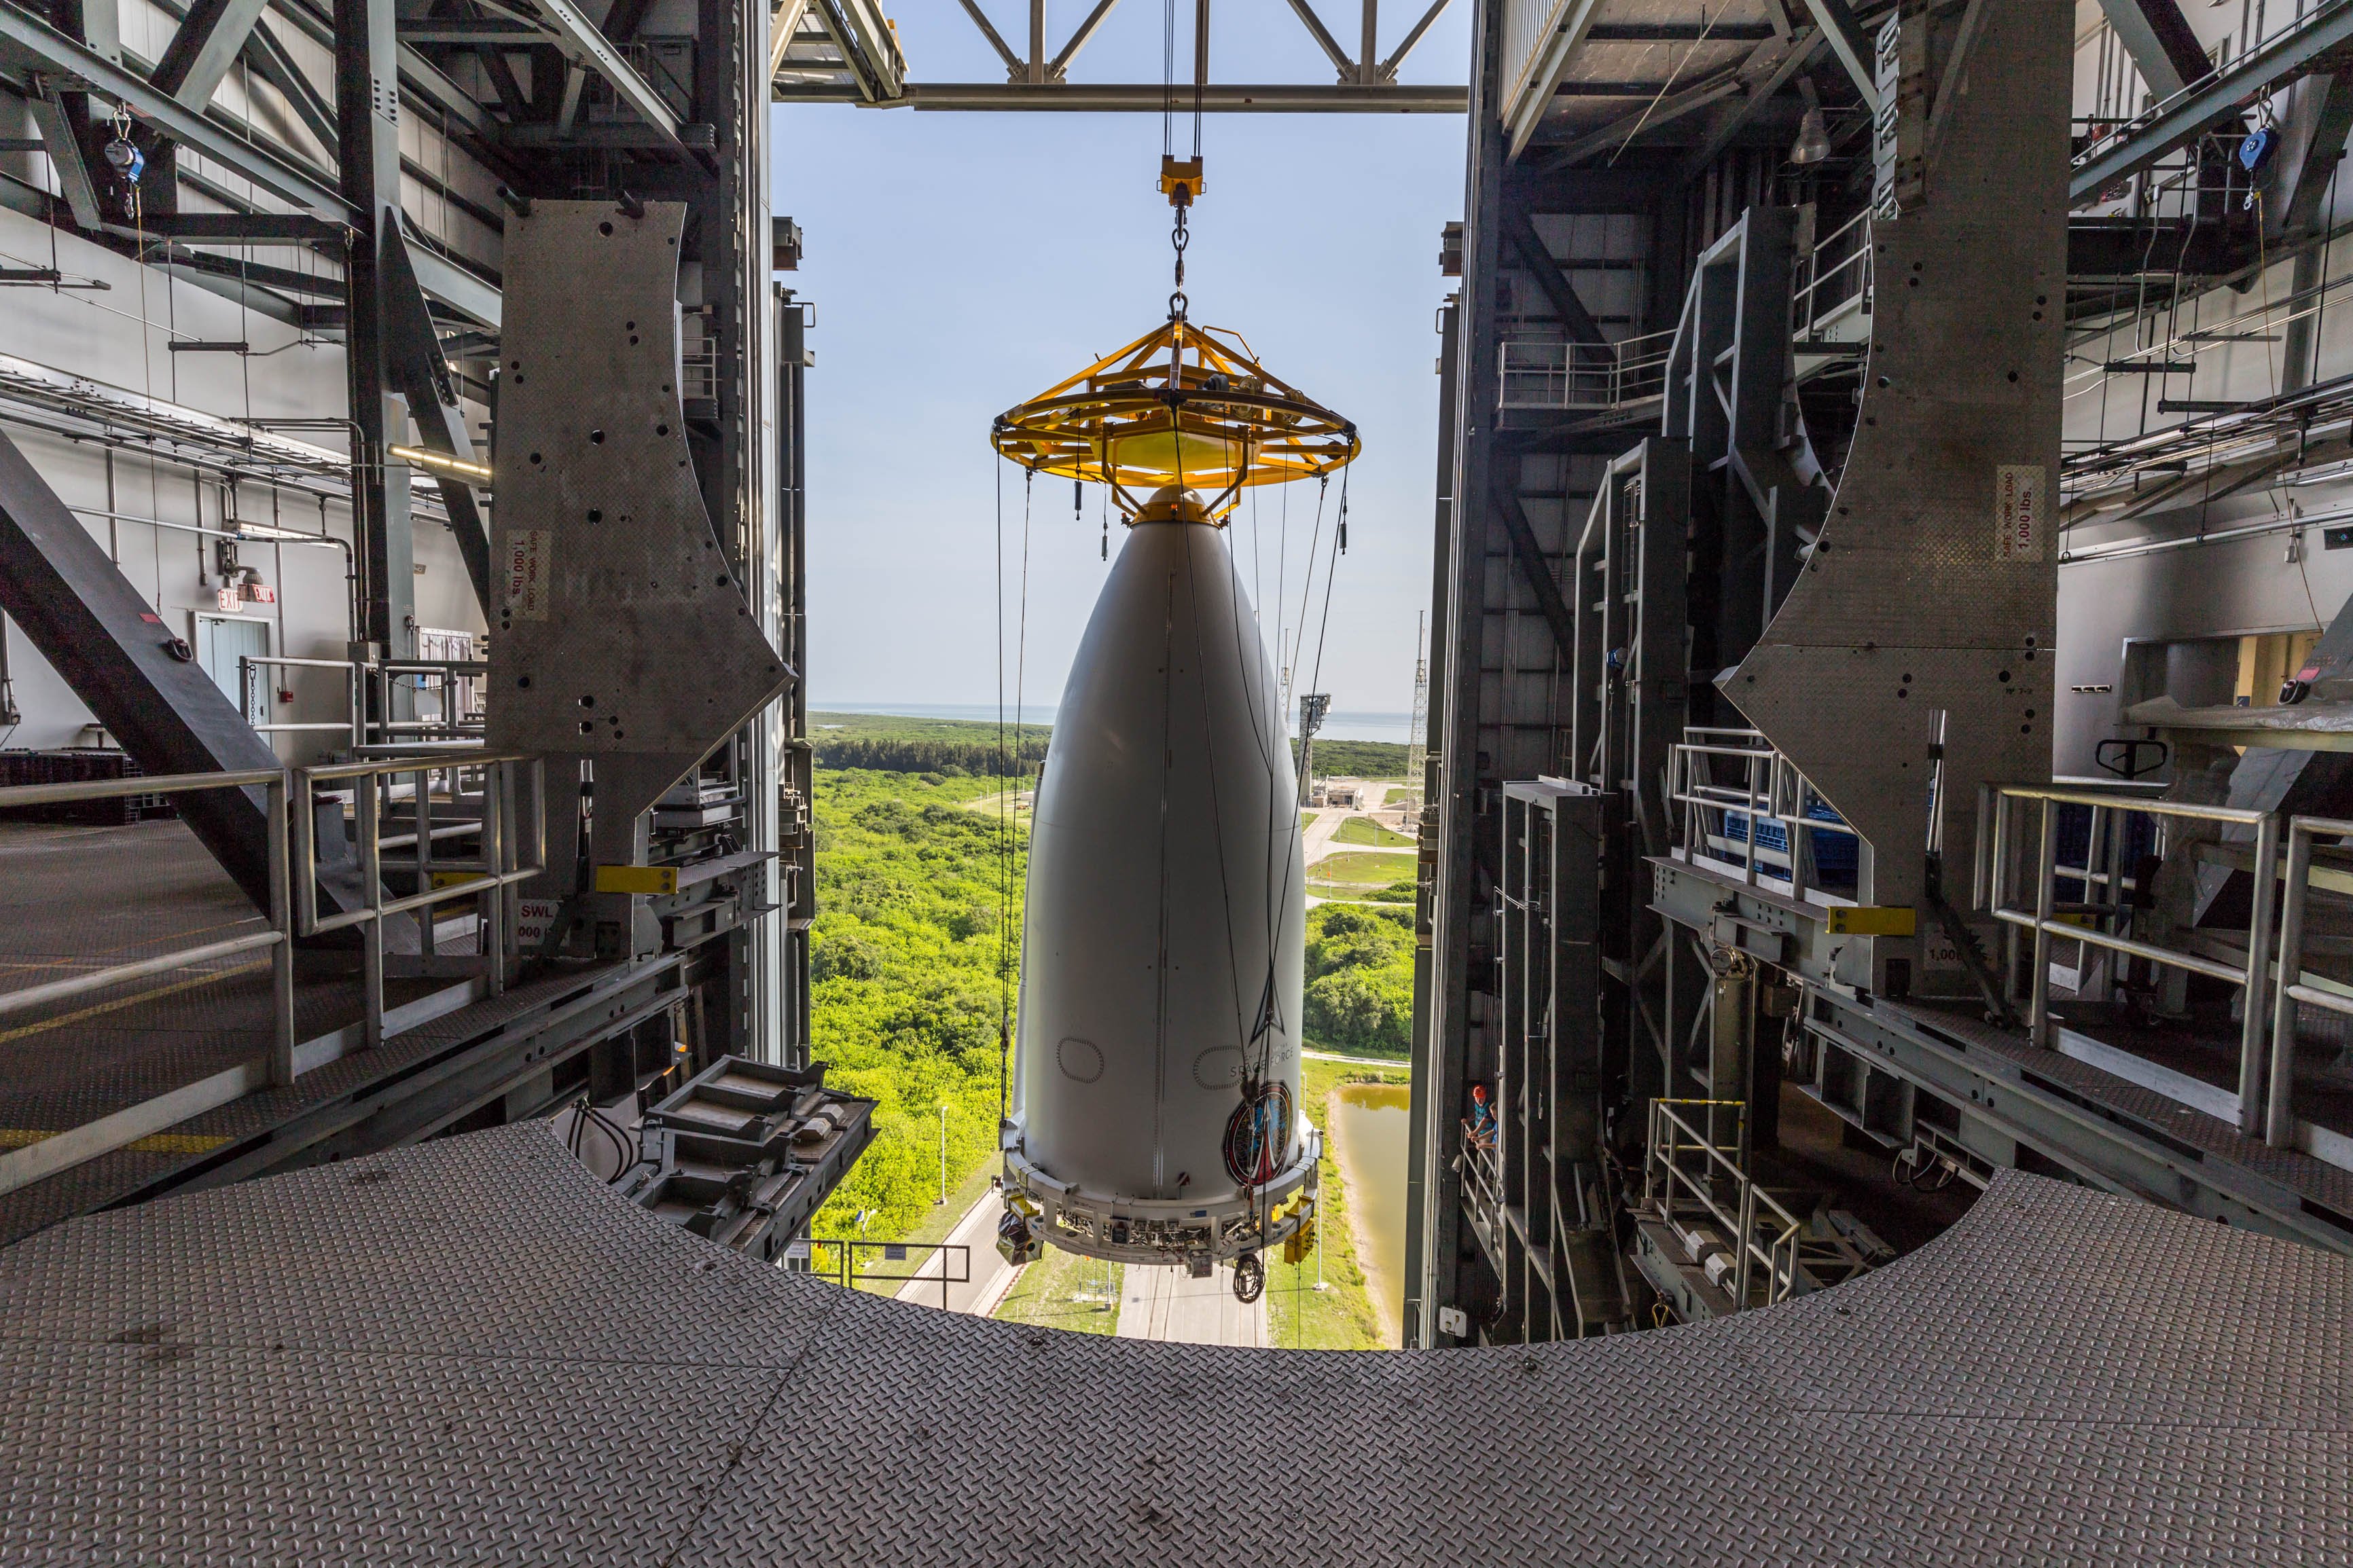 USSF-12 will launch from SLC-41 at Cape Canaveral. Photo by United Launch Alliance